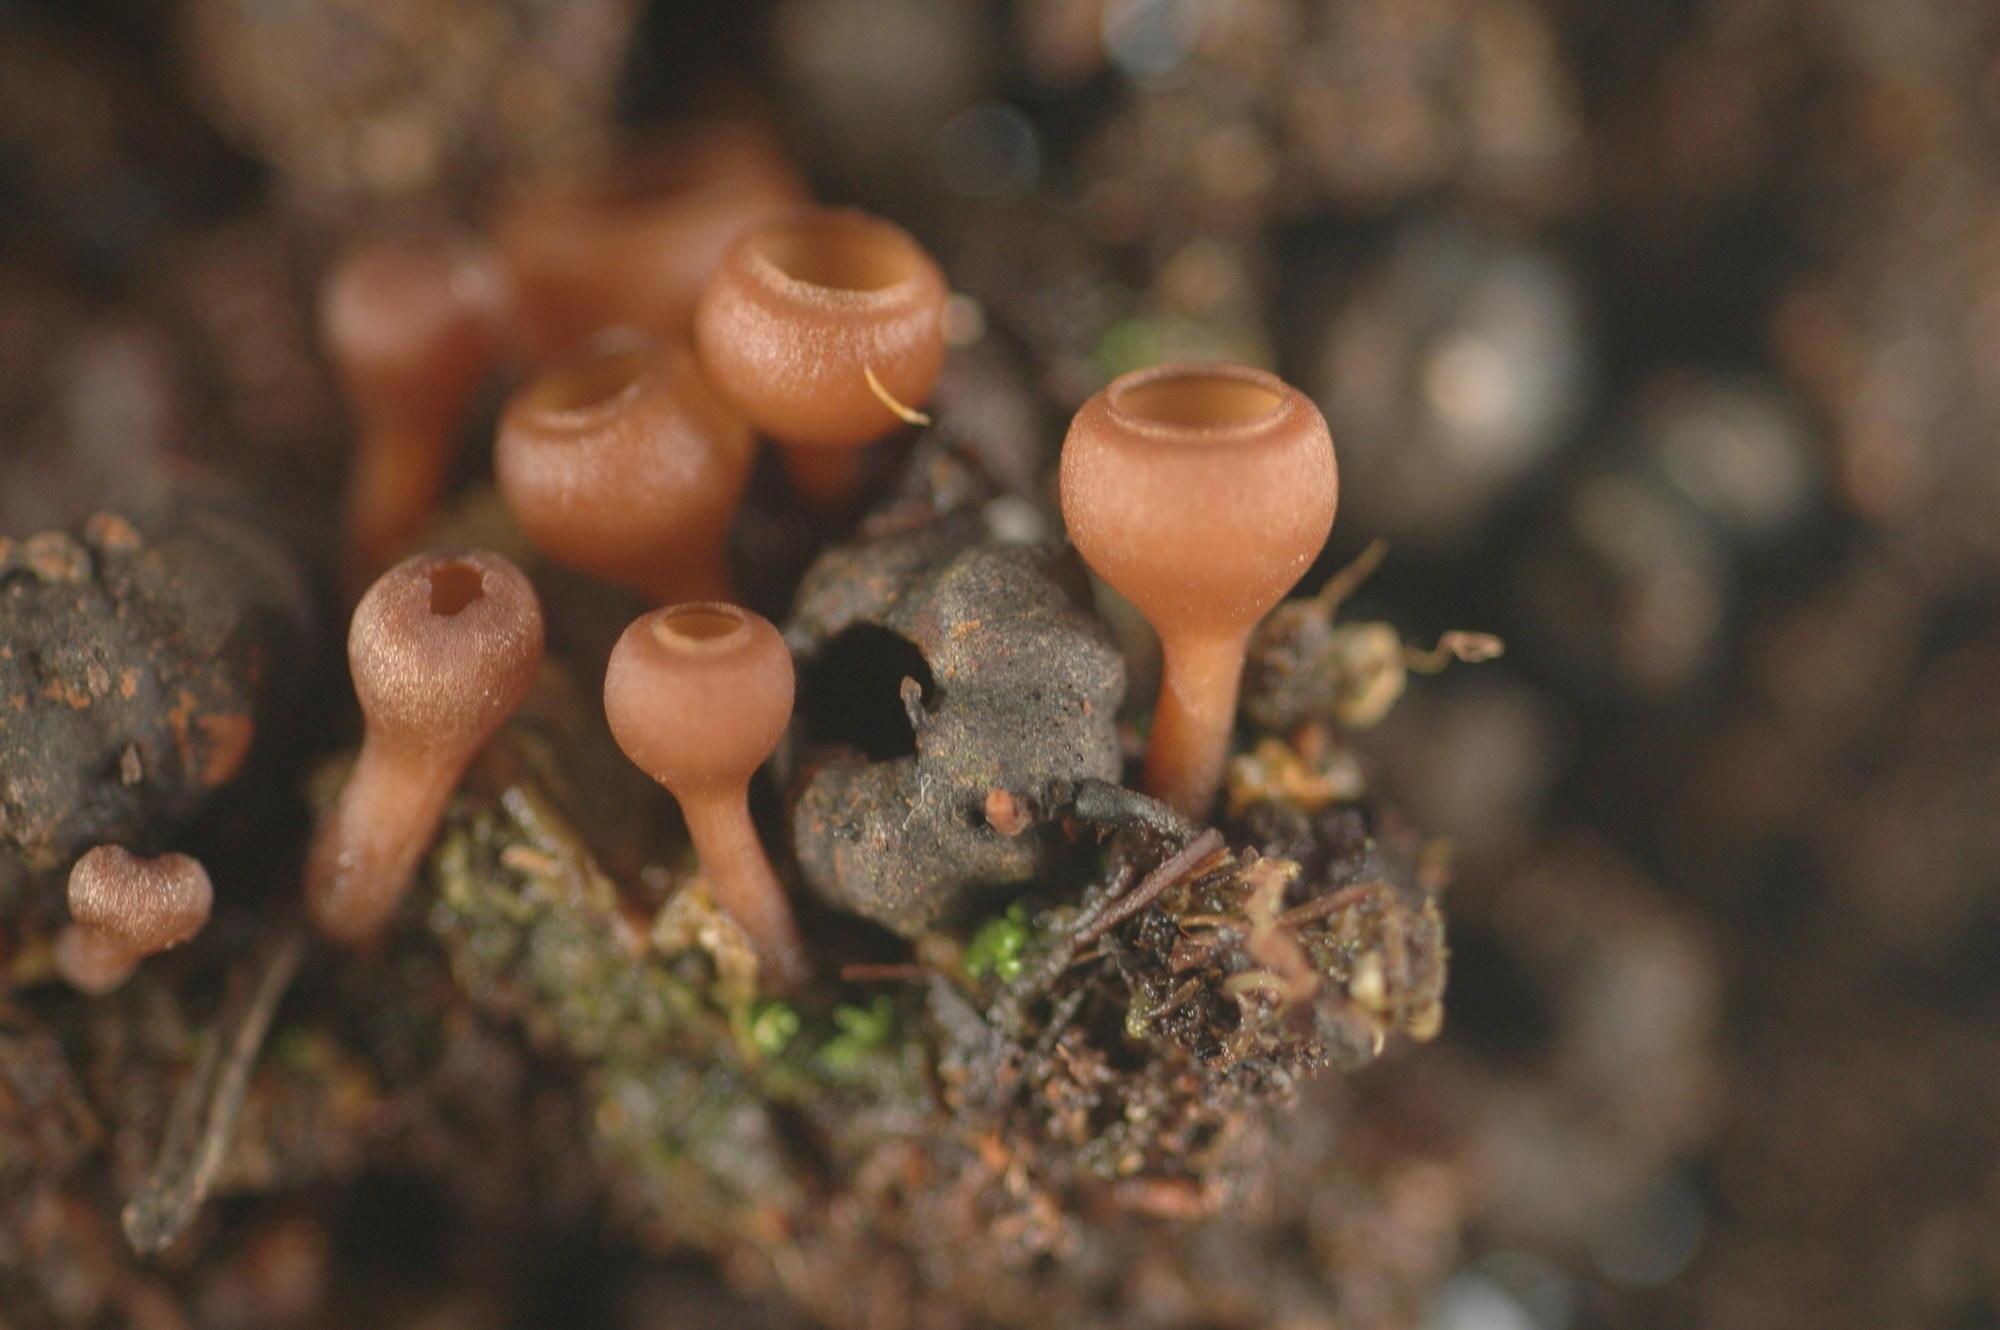 Small brown mushrooms (apothecia) developing from mummies.